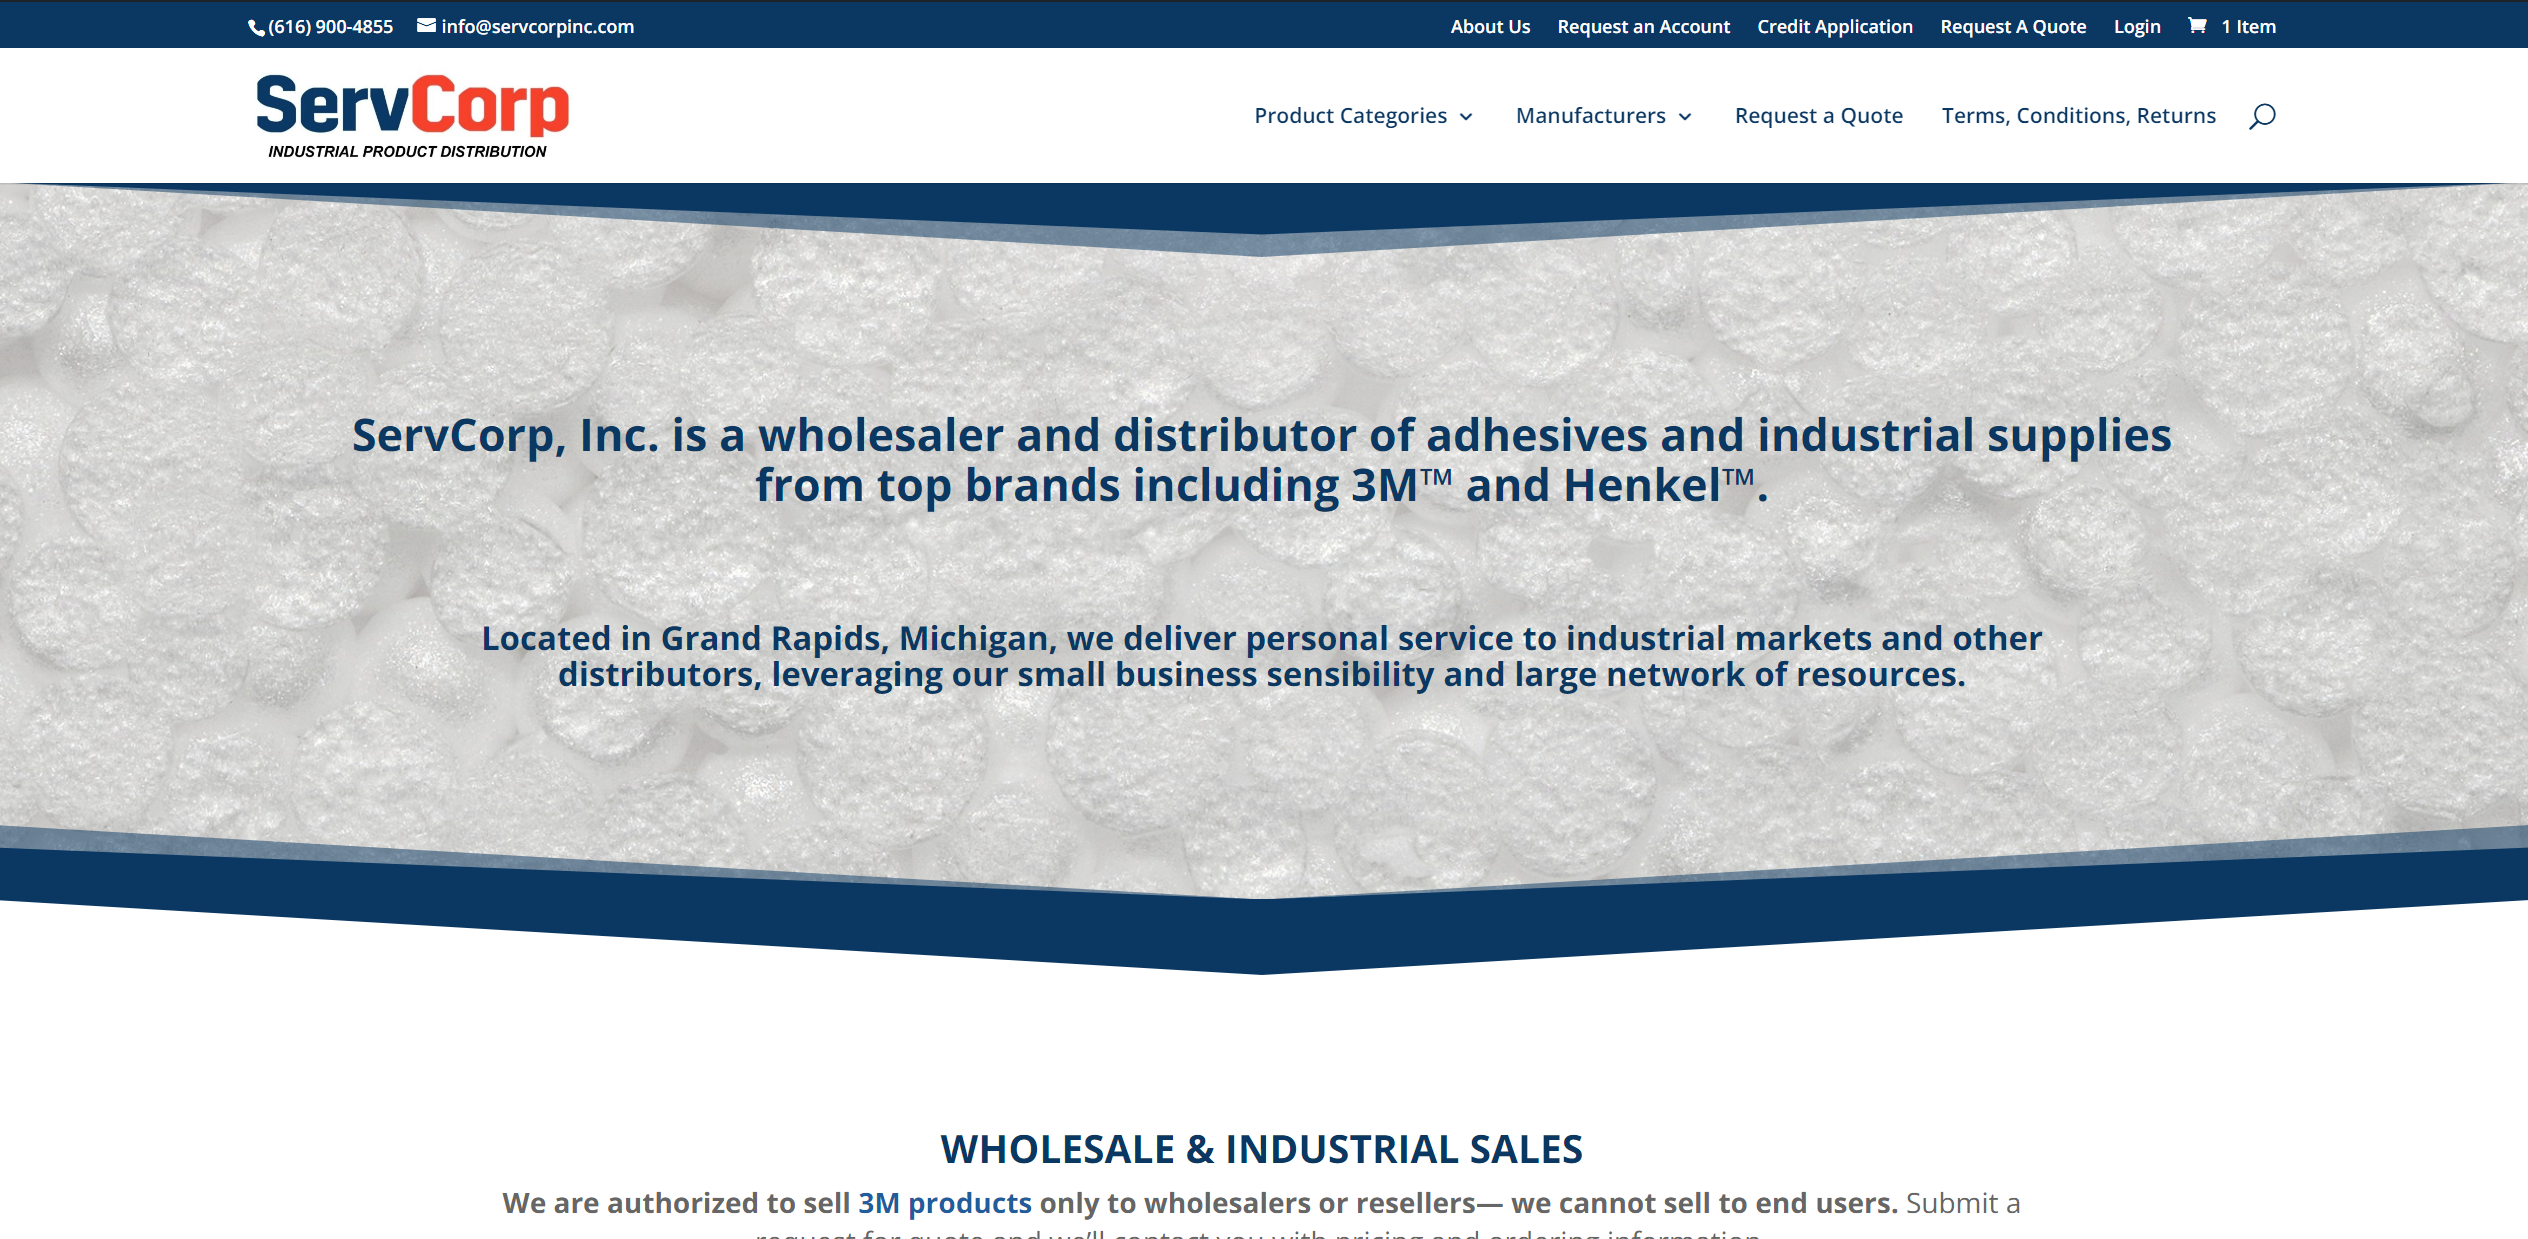 Website design and ecommerce for ServCorp, Inc, a wholesale supplier of industrial products in Grand Rapids MI - Purple-Gen.com